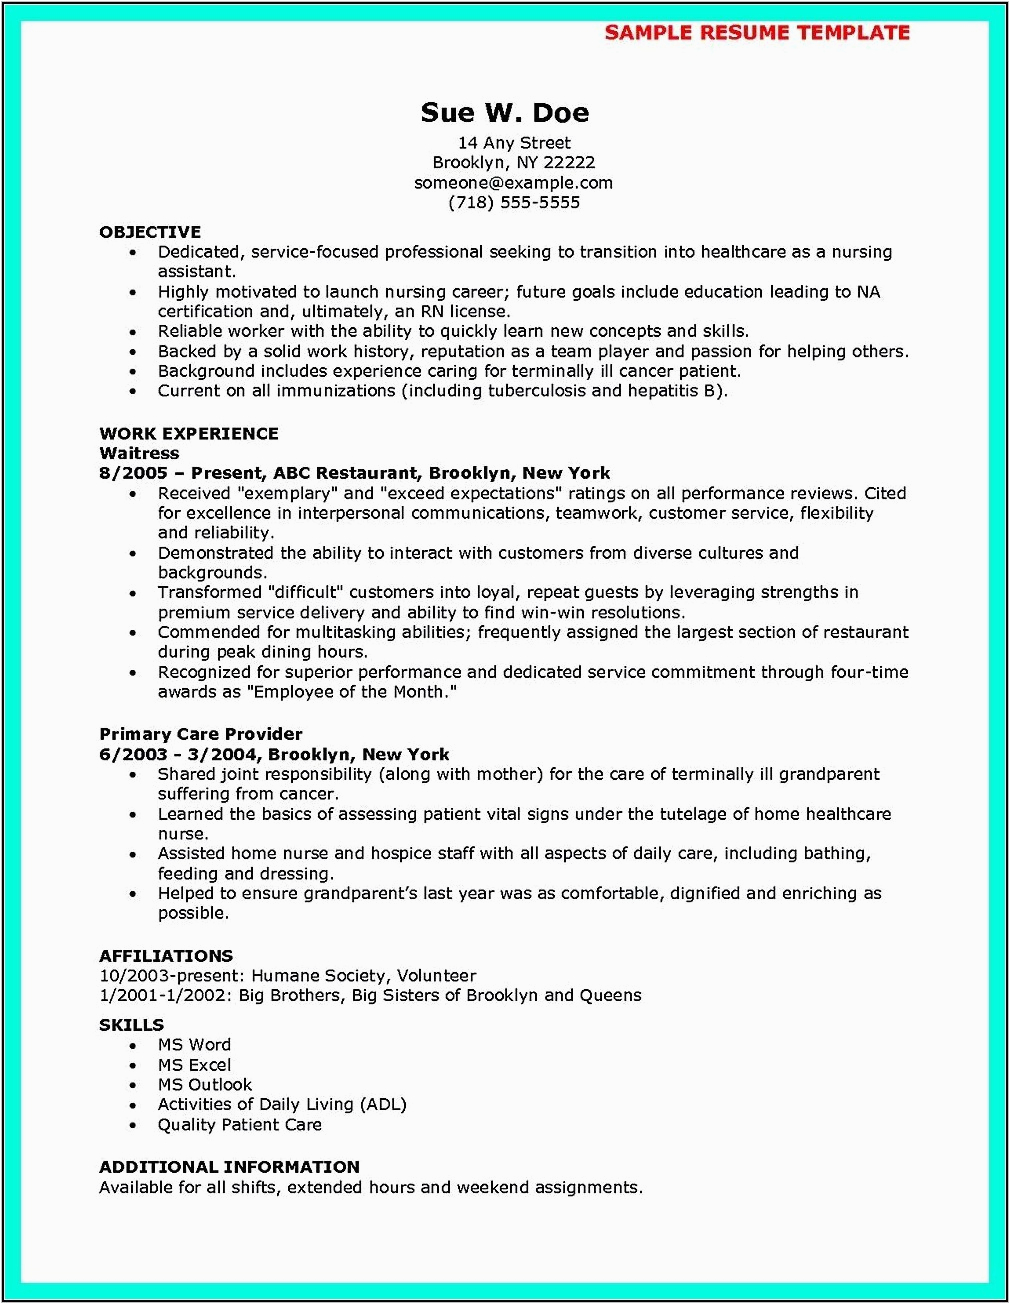 Sample Resume for Cna with No Previous Experience Resume for Cna Job with No Experience